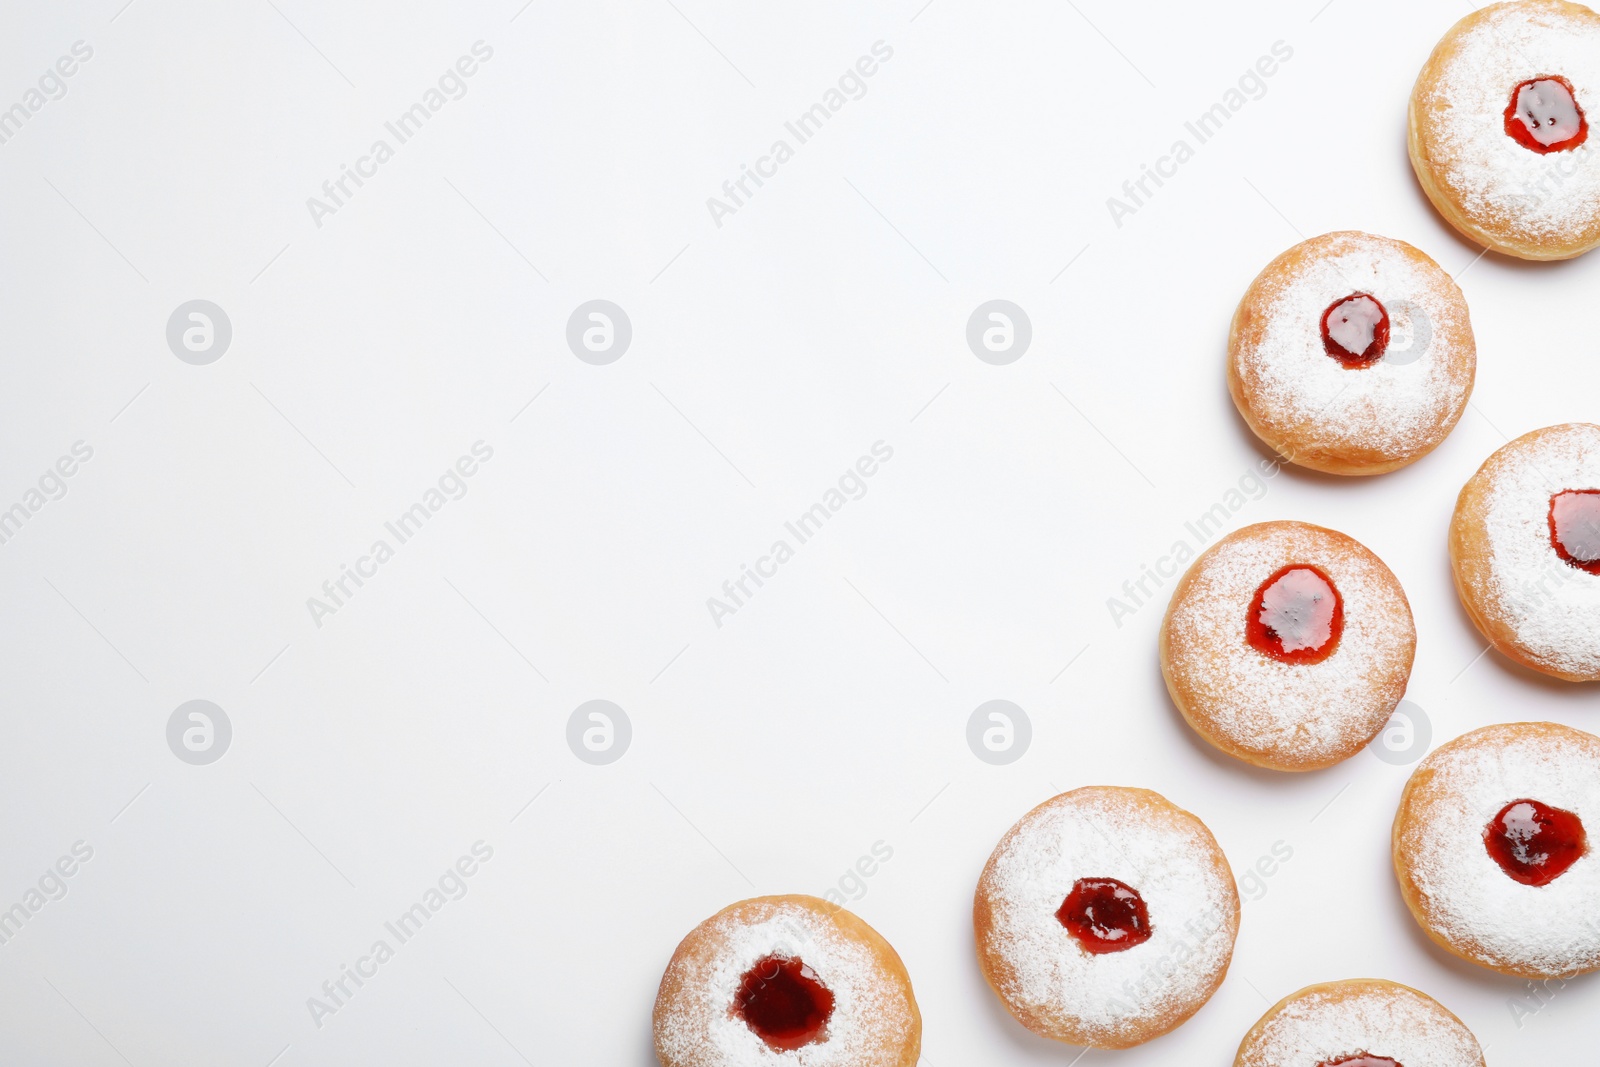 Photo of Hanukkah doughnuts with jelly and sugar powder on white background, top view. Space for text